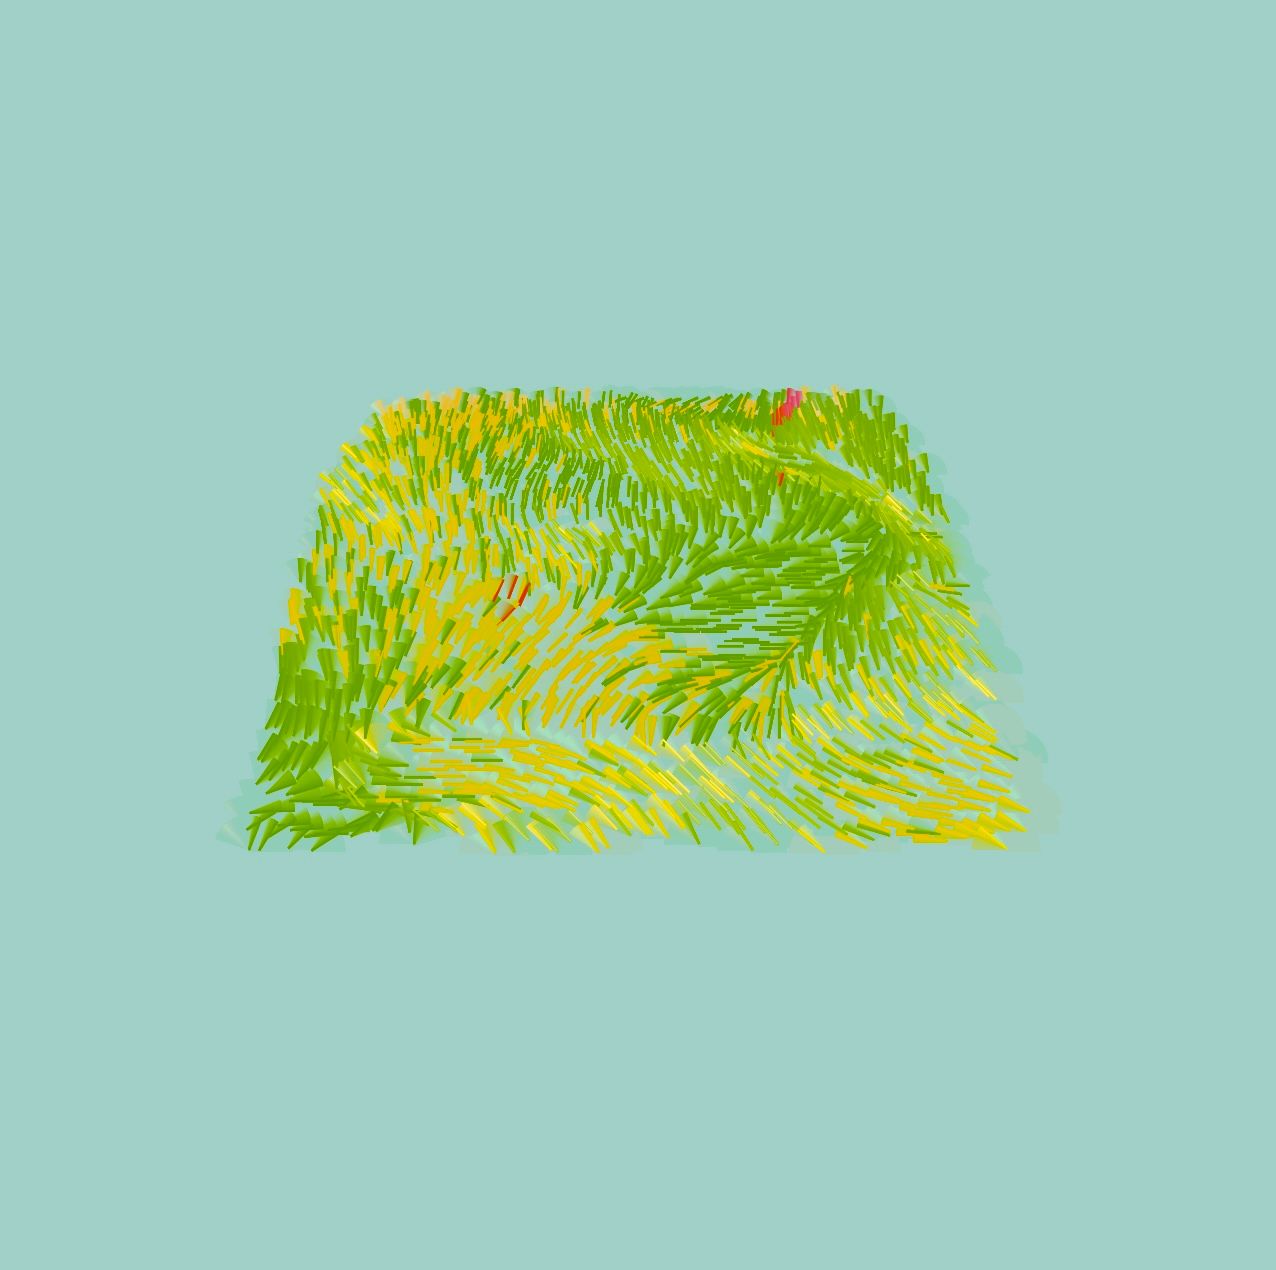 abstracted grassy field